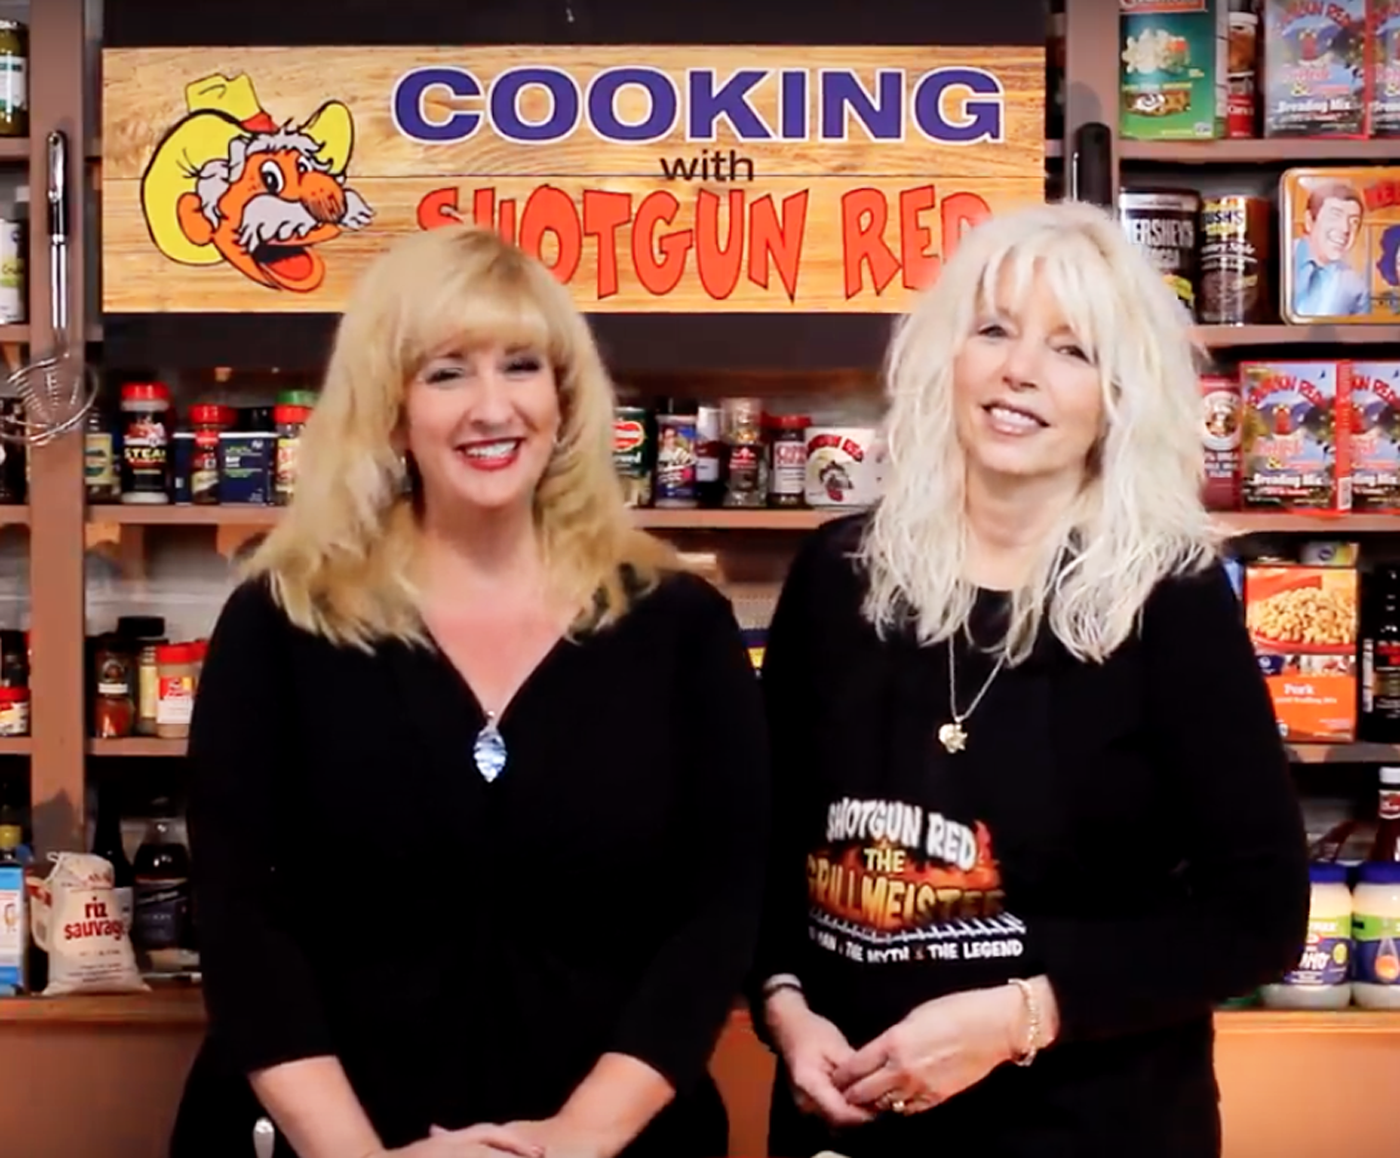 Jennifer Bruce and Miss Sheila Cooking with Shotgun Red